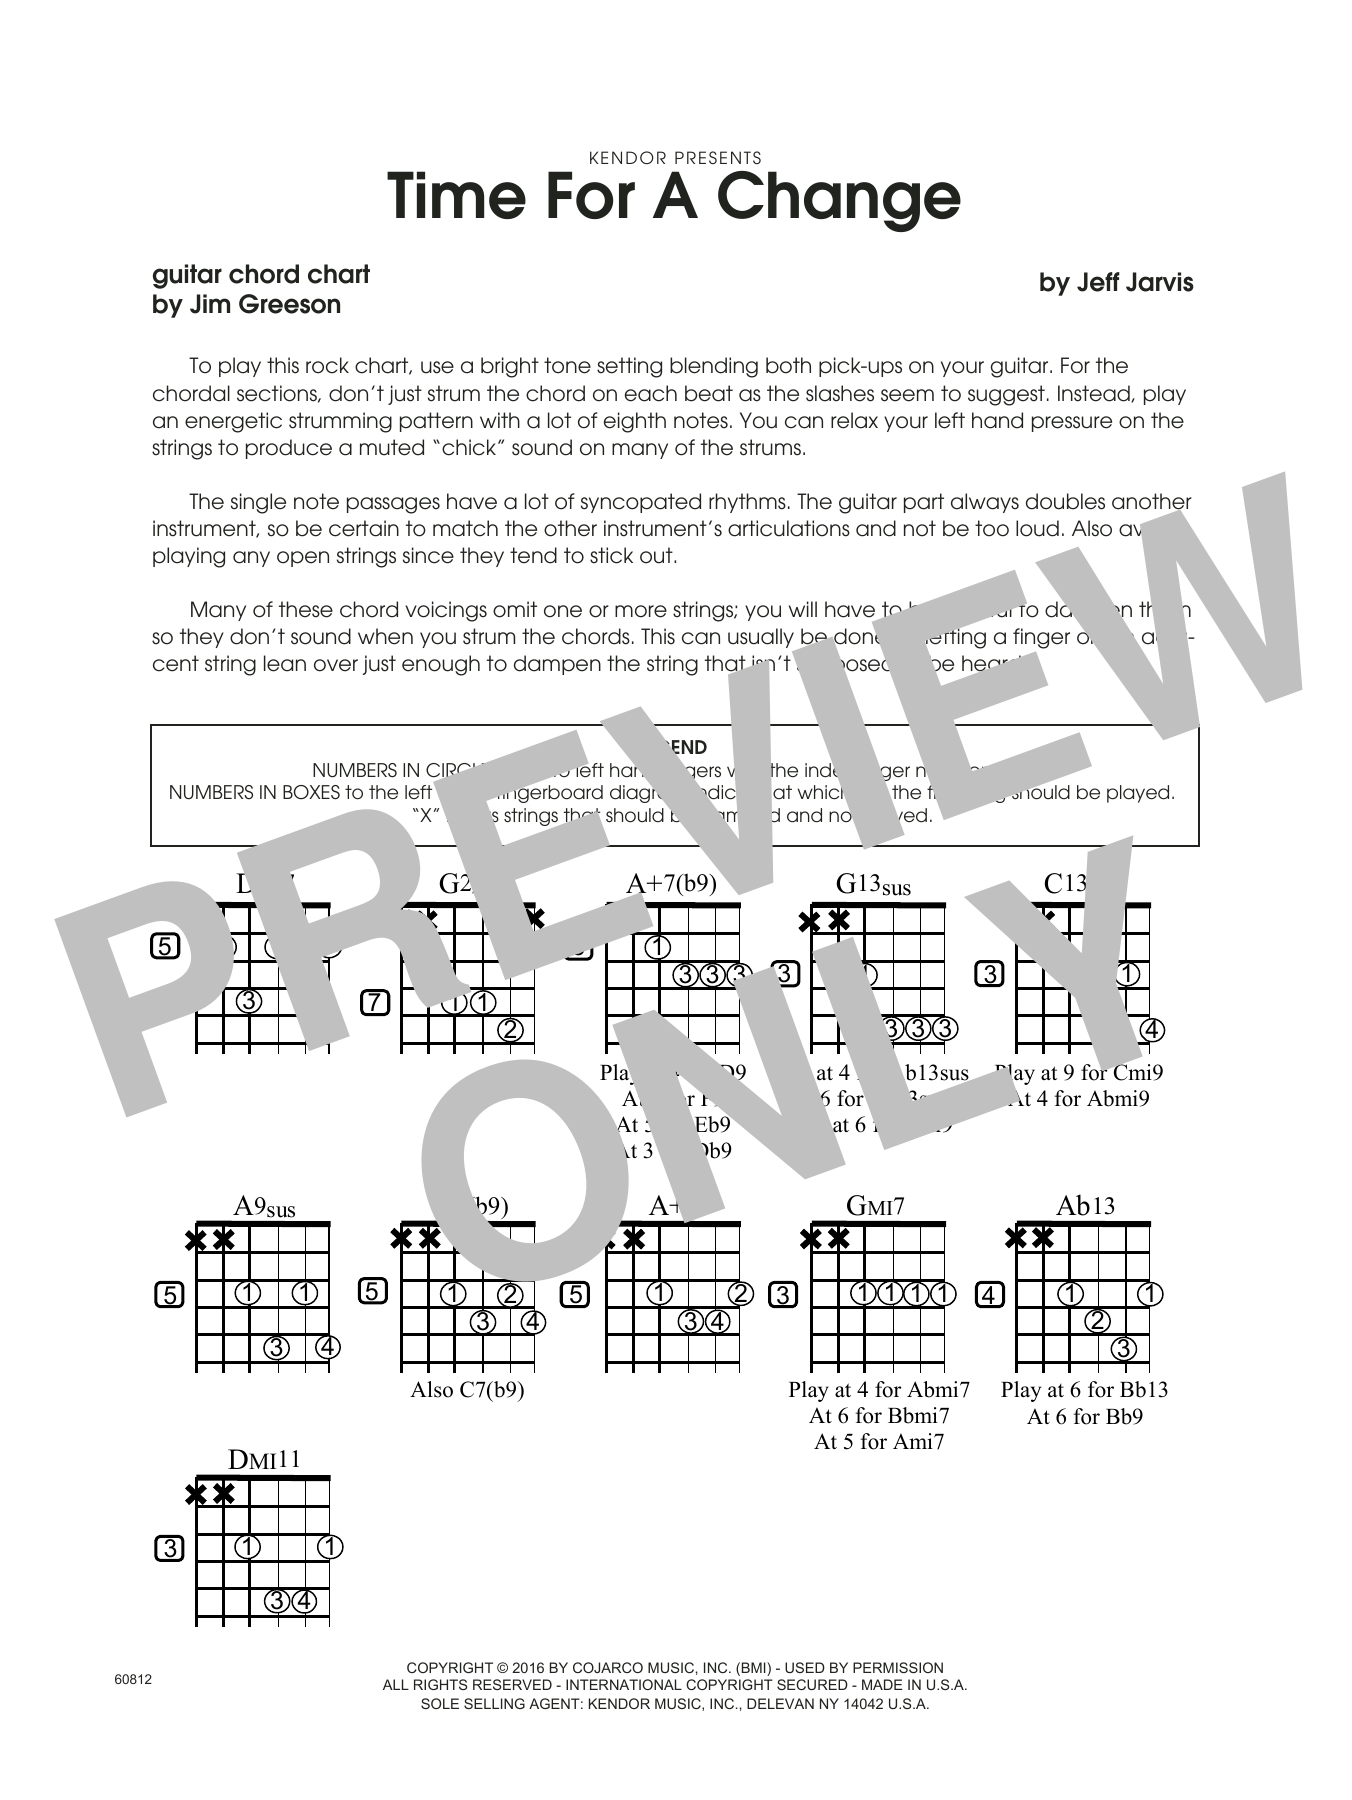 Download Jeff Jarvis Time For A Change - Guitar Chord Chart Sheet Music